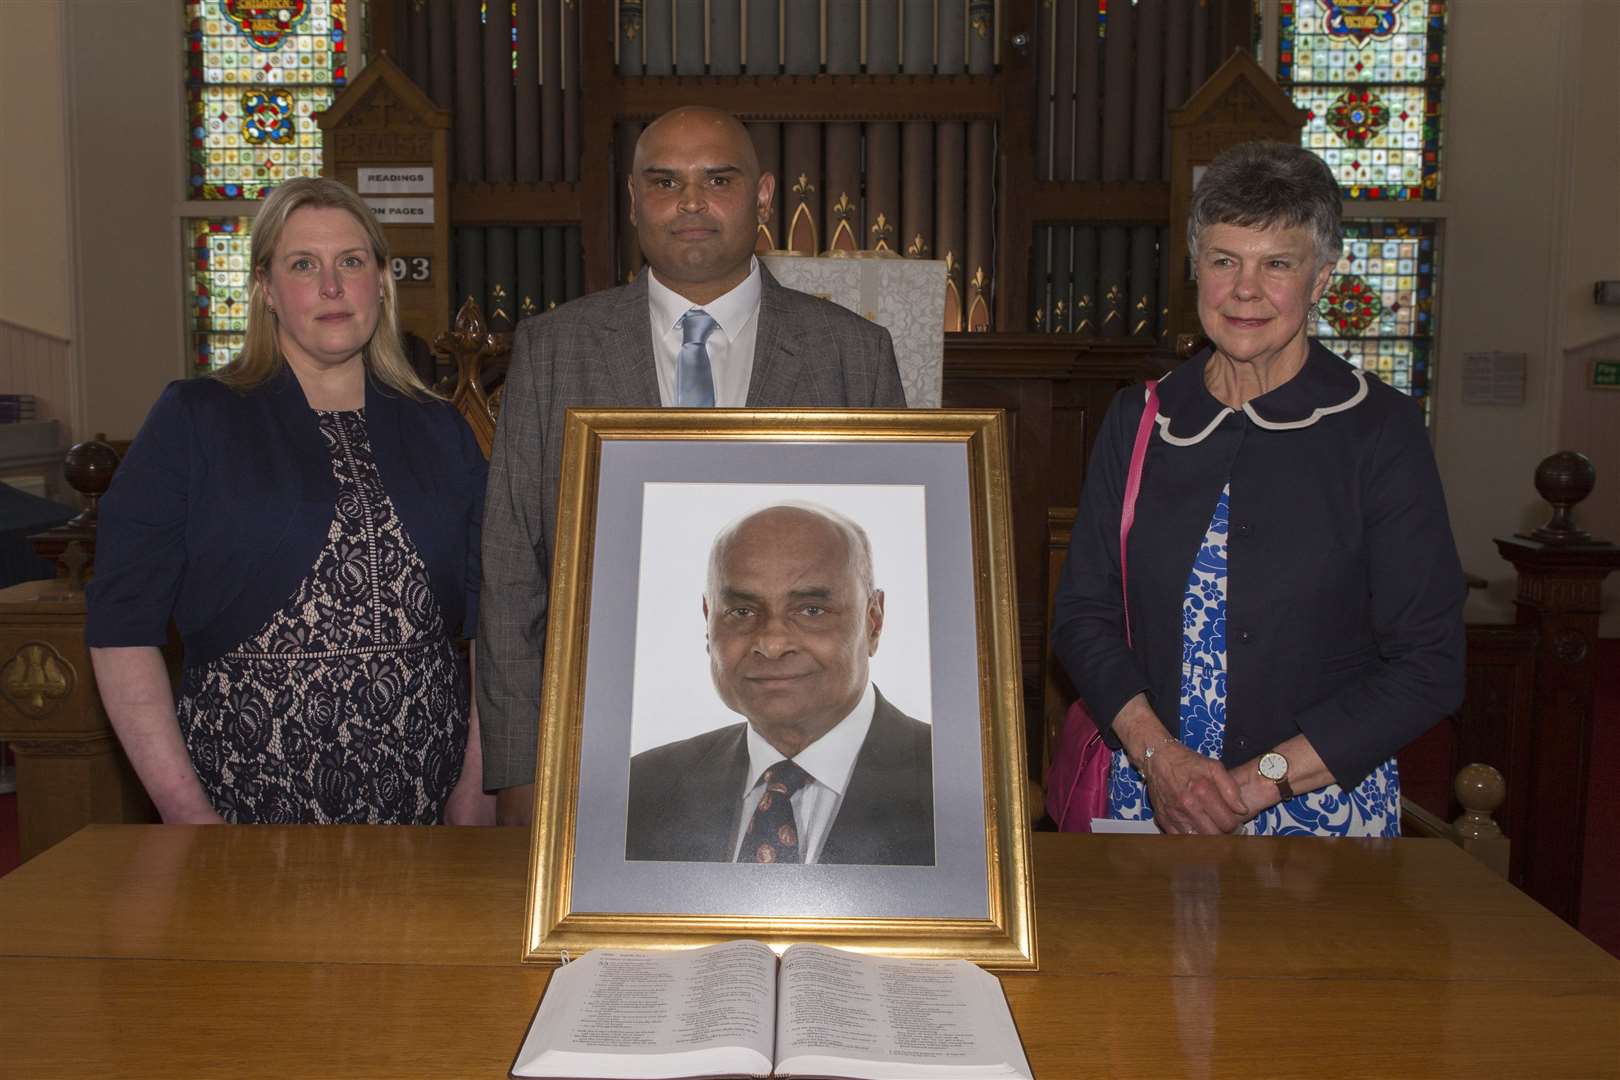 Pradip Datta's son, Dr Sandip Datta, and daughter-in-law, Sam Datta, with lifelong friend Dr Loretta Reynolds behind a framed photograph of the respected surgeon in Wick St Fergus Church. Picture: Robert MacDonald / Northern Studios